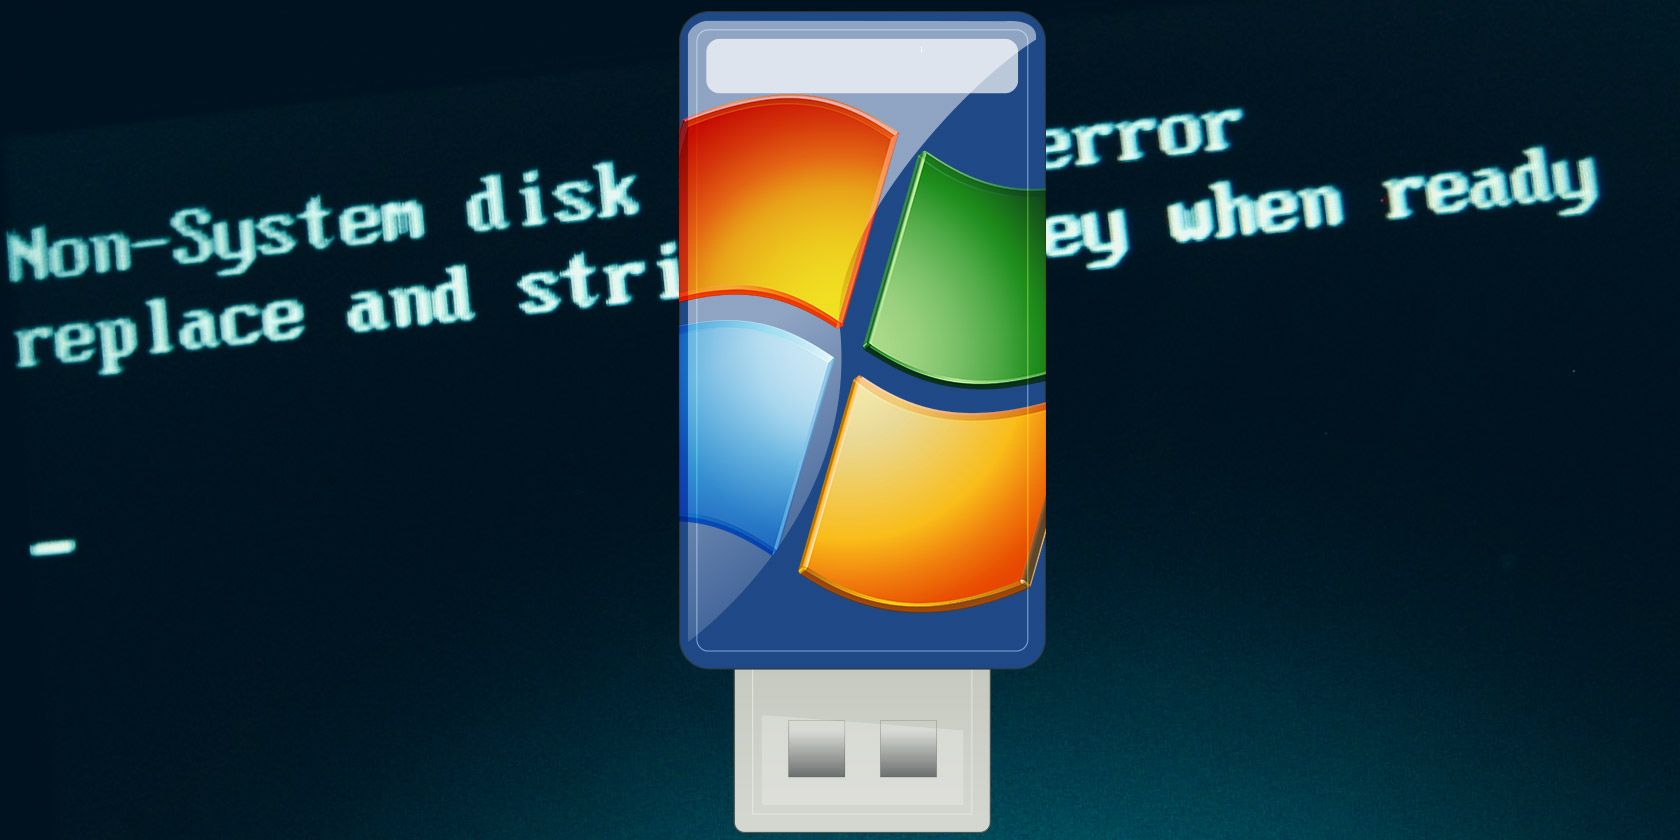 how to use a bootable usb on a